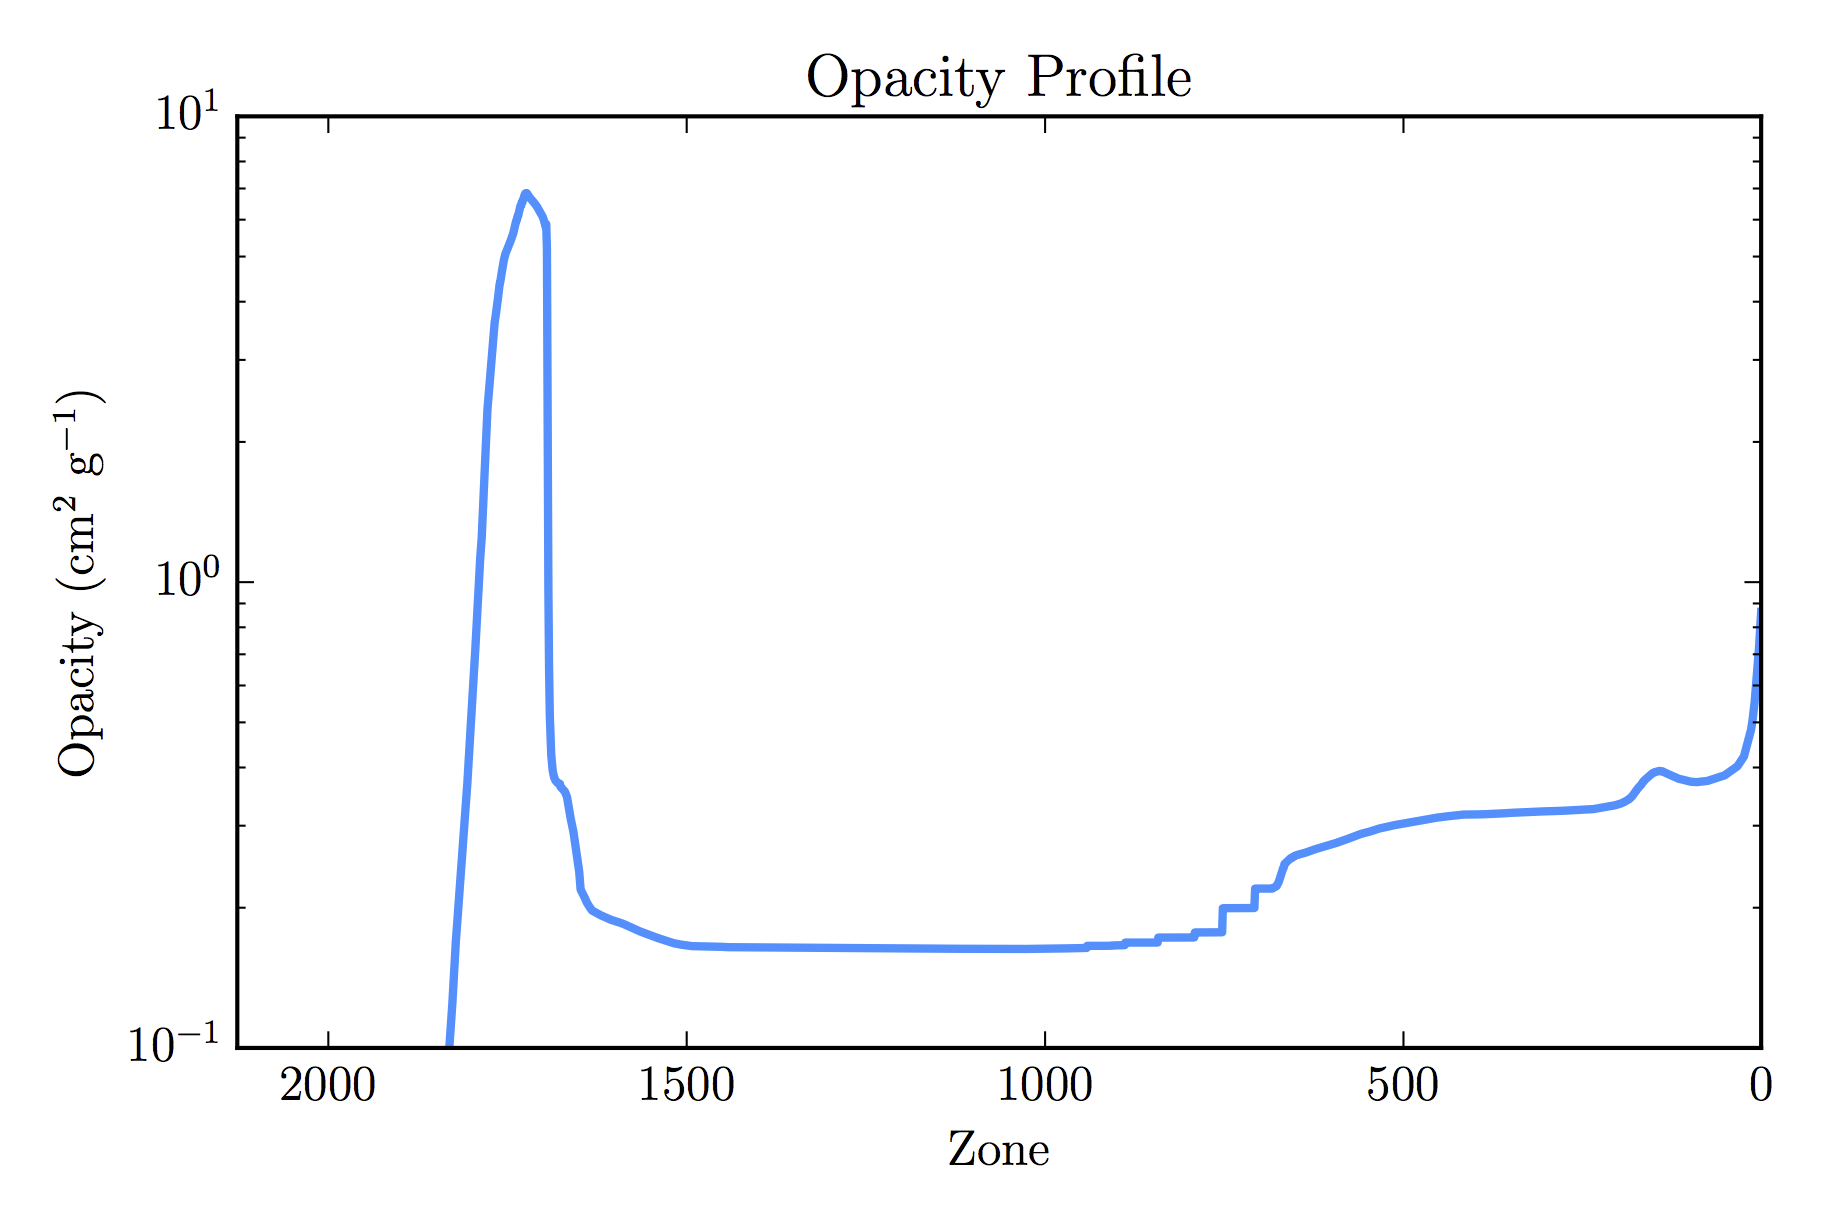 Plot of opacity profile in troublesome model.